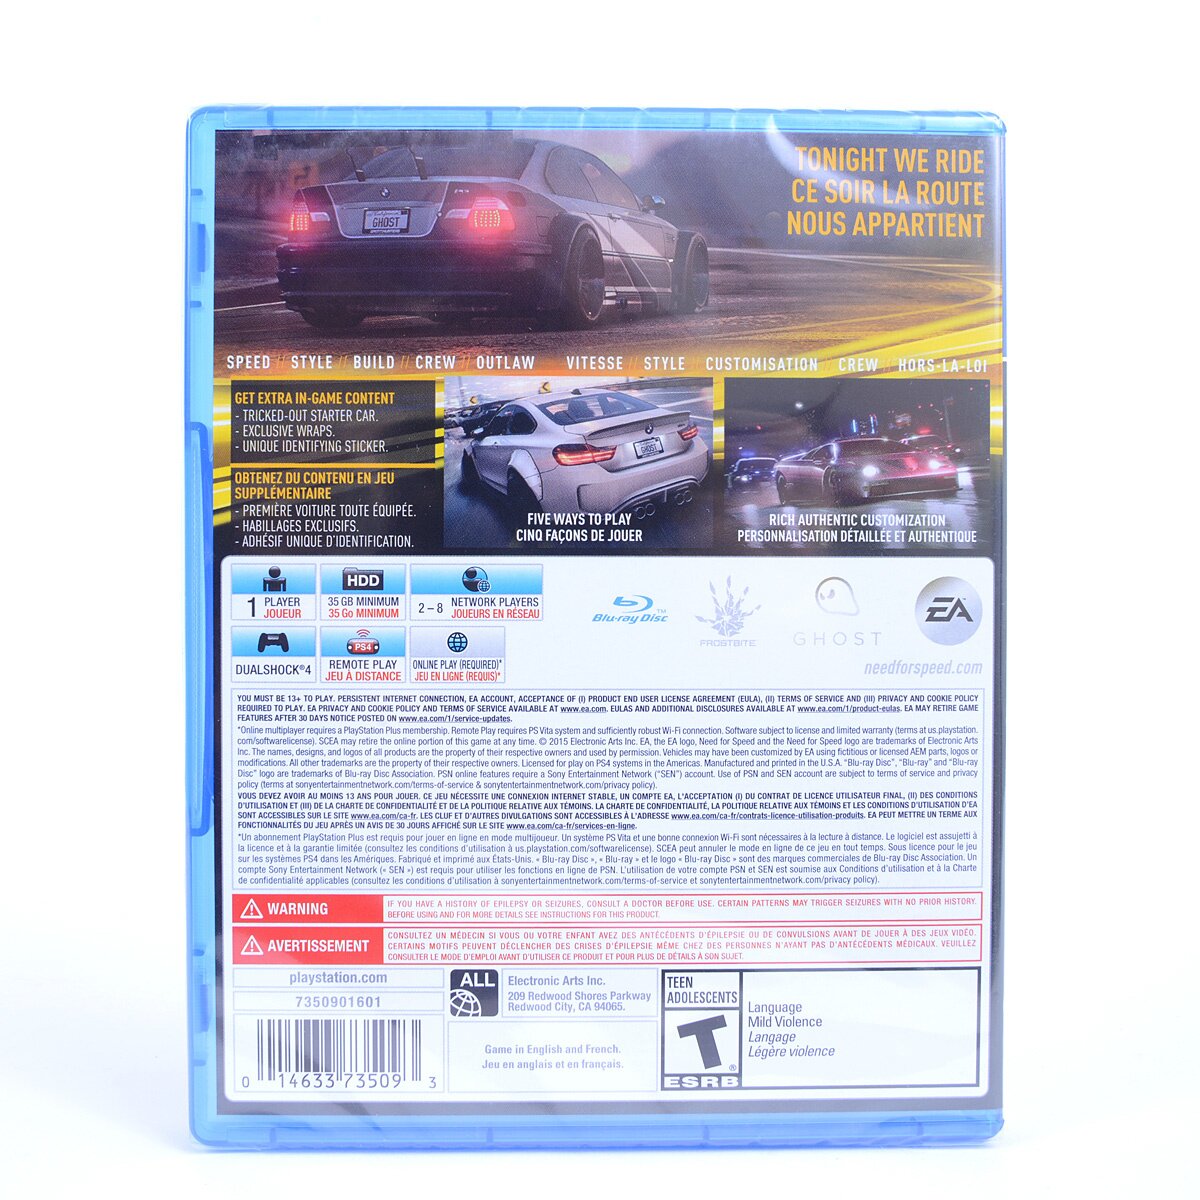 Need for Speed Deluxe Edition (PS4) - Tokyo Otaku Mode (TOM)